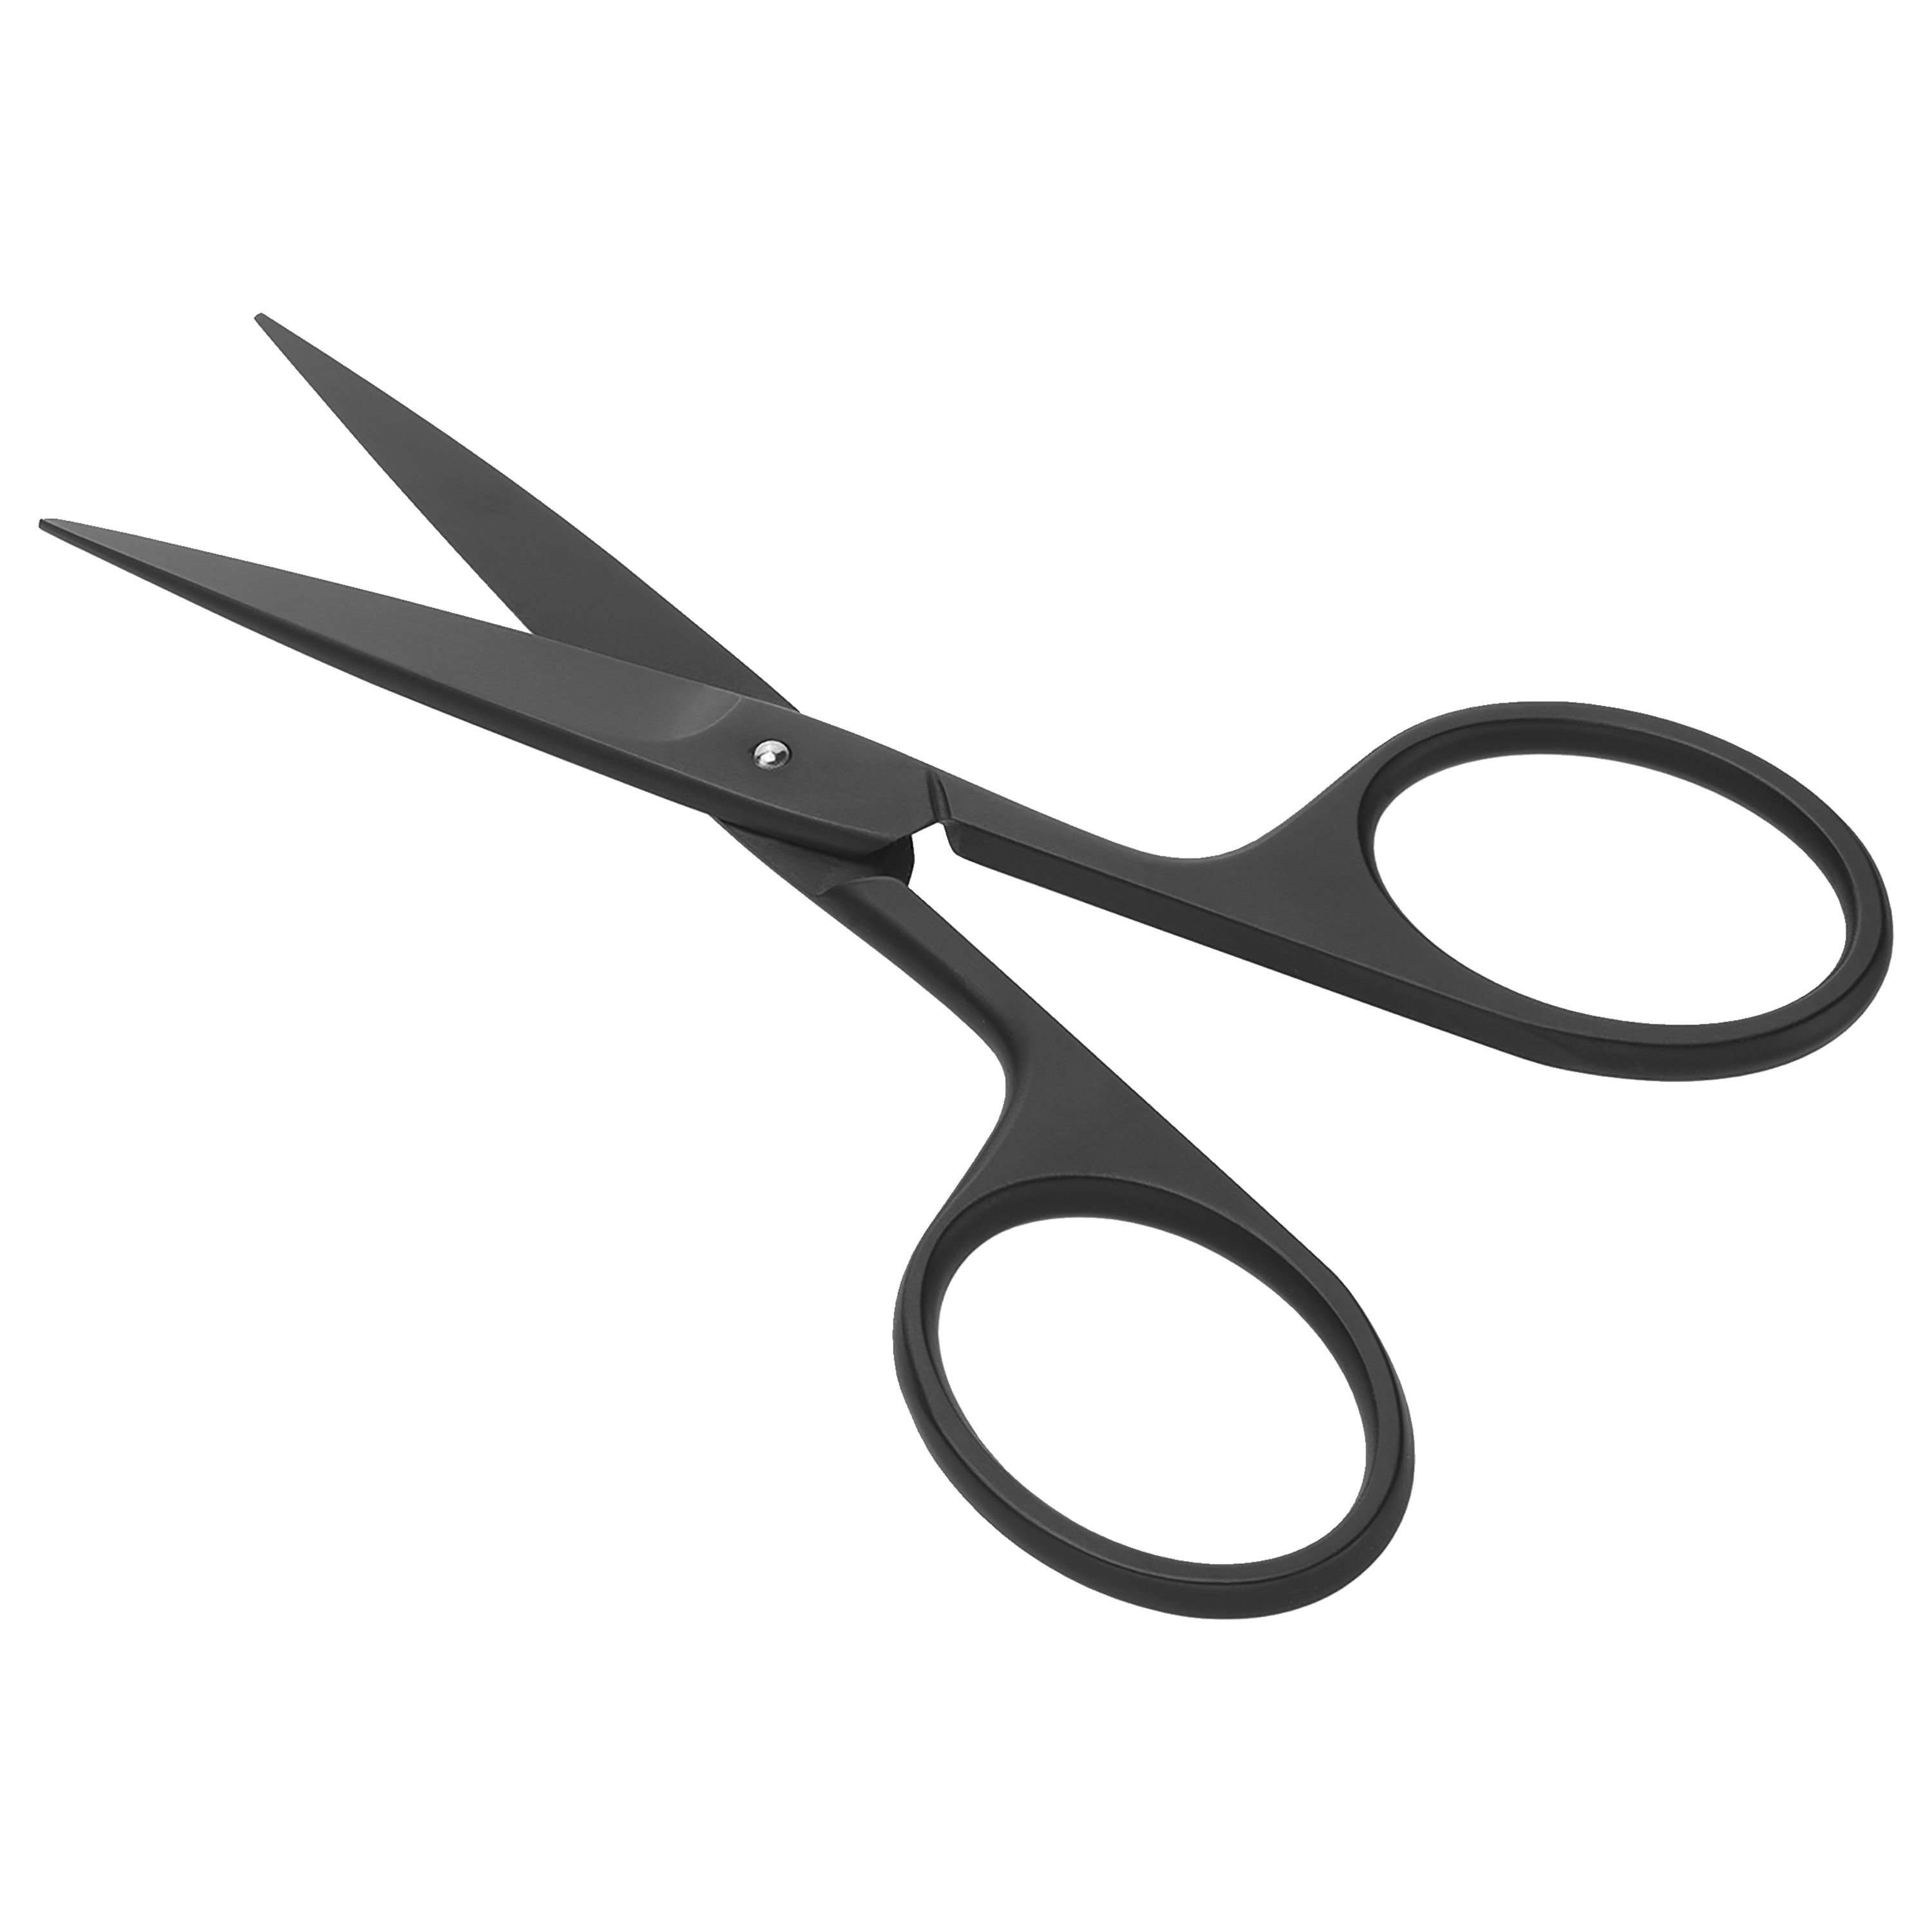 Zwilling Zwiling Twinox Nose Hair Scissors 105 mm